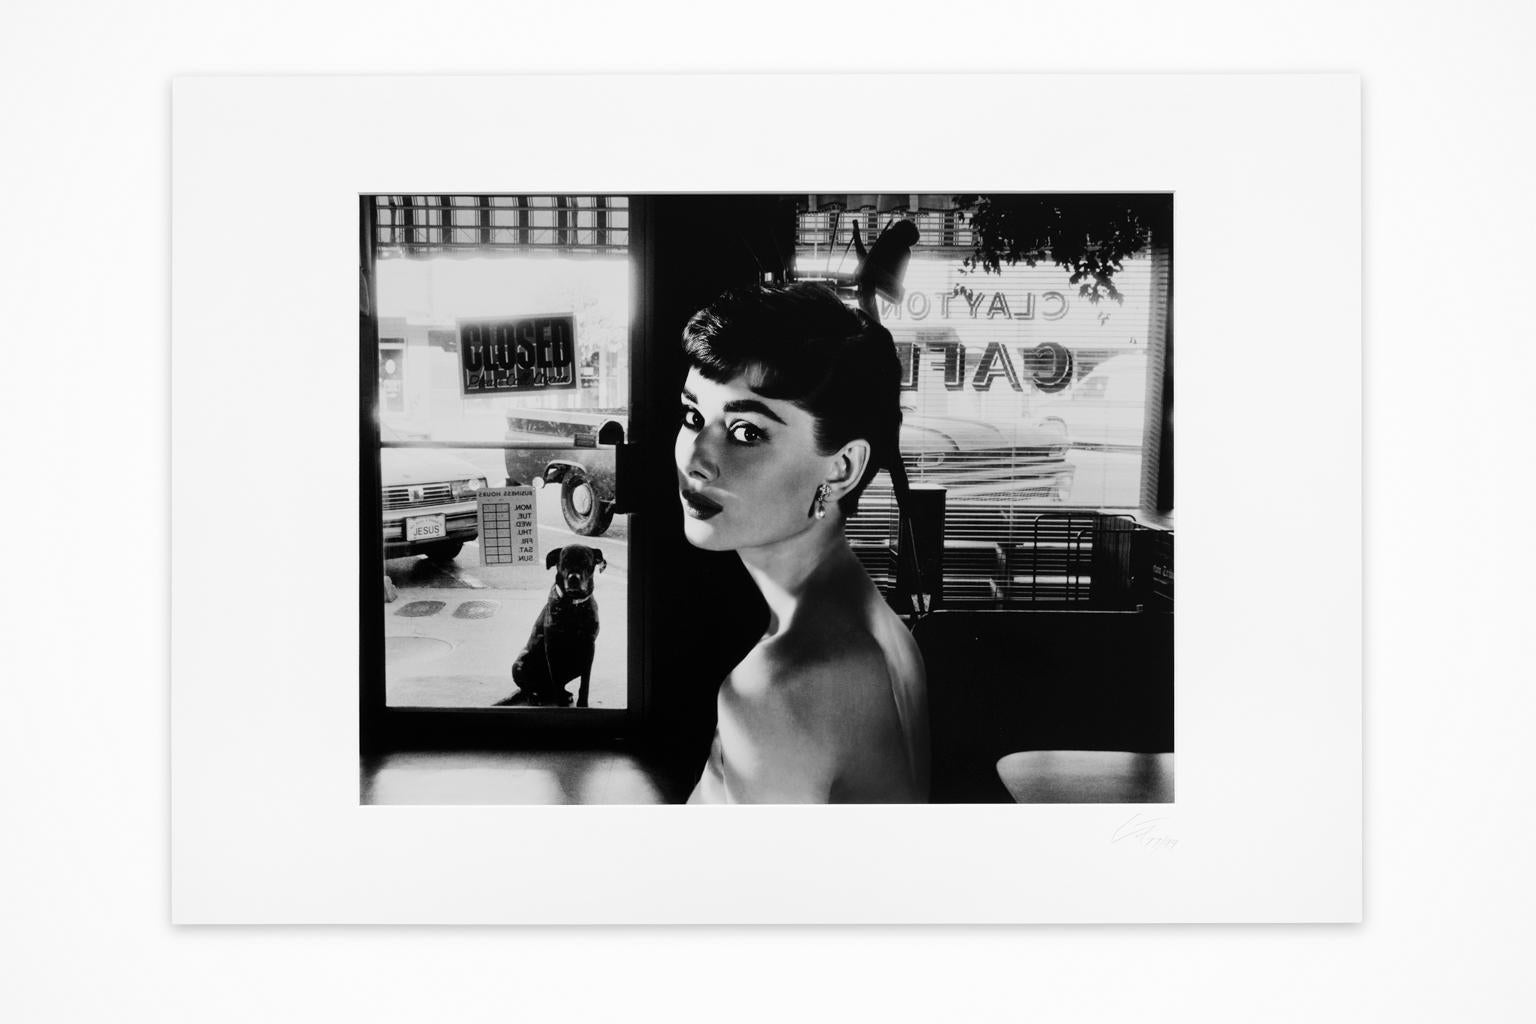 SALE ONE WEEK ONLY

"Fragility Adored" a Fotocollage print on photographic paper by Axel Crieger (1955 - )  of an Audrey Hepburn publicity photo for "Sabrina" now placed in a cafe. It is mounted on upper edges of sheet under paste-partout,